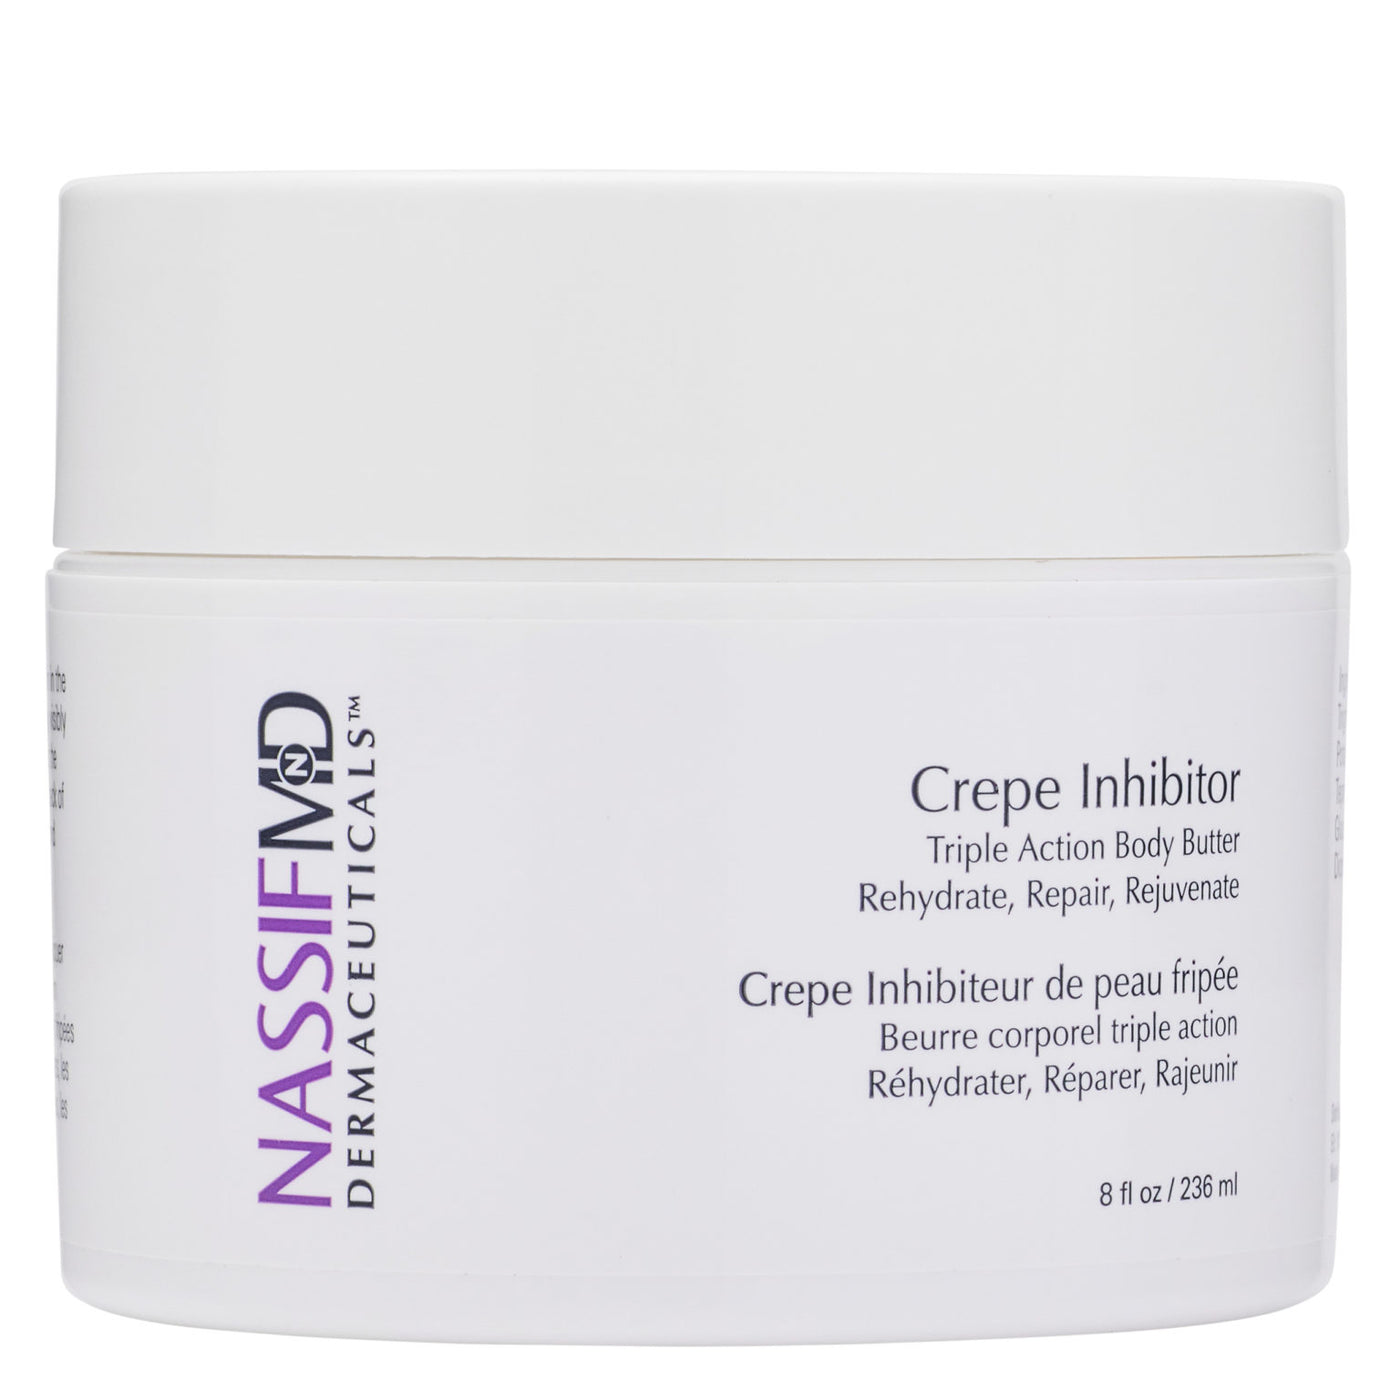 DR. NASSIF – CREPE INHIBITOR TRIPLE ACTION BODY BUTTER MED GLYCOIN®, 236 ml